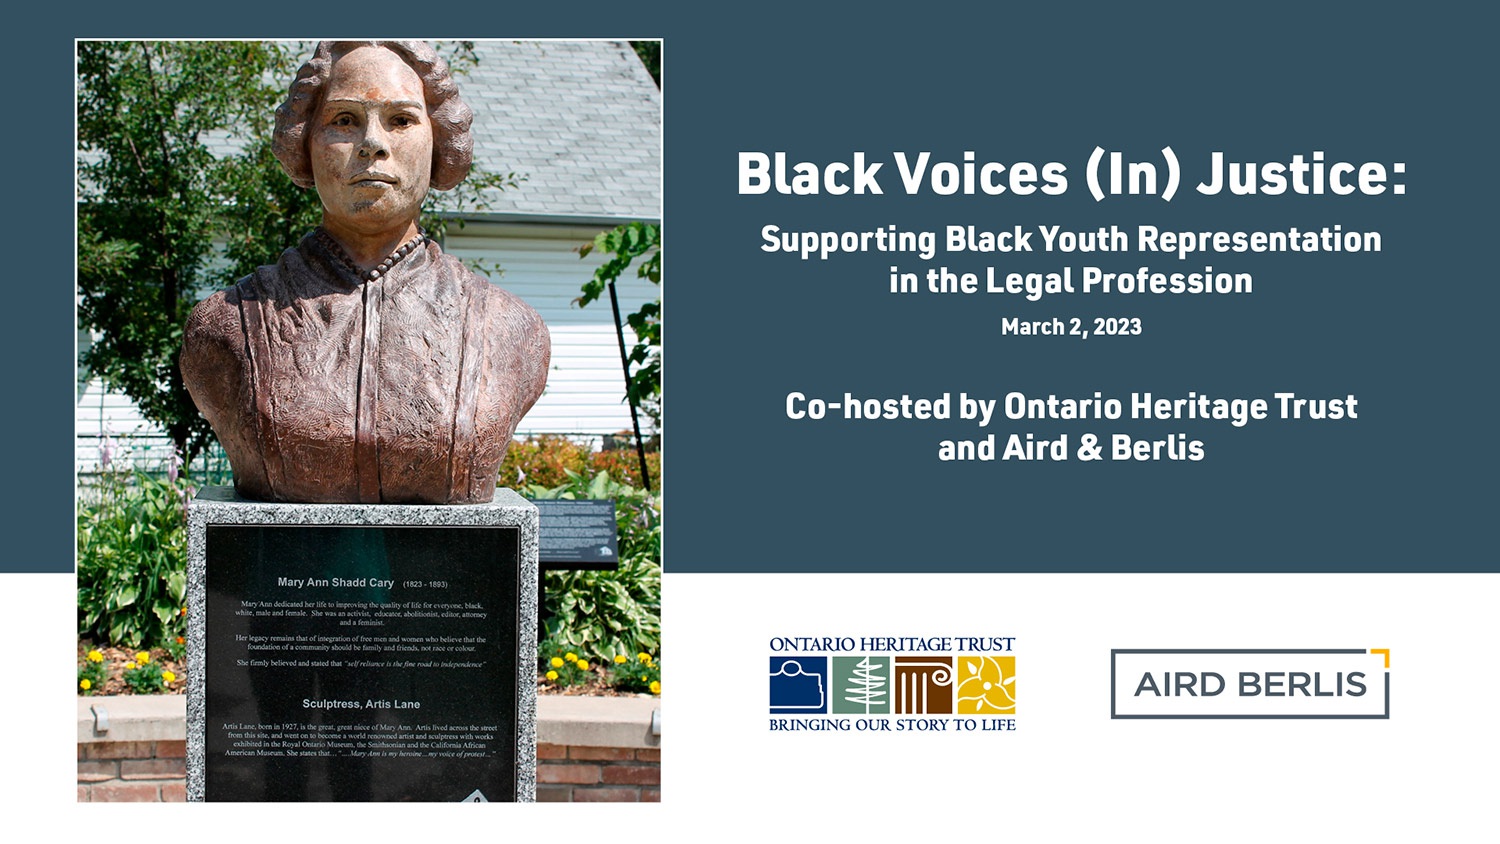 Black Voices (In)Justice: Supporting Black Youth Representation in the Legal Profession